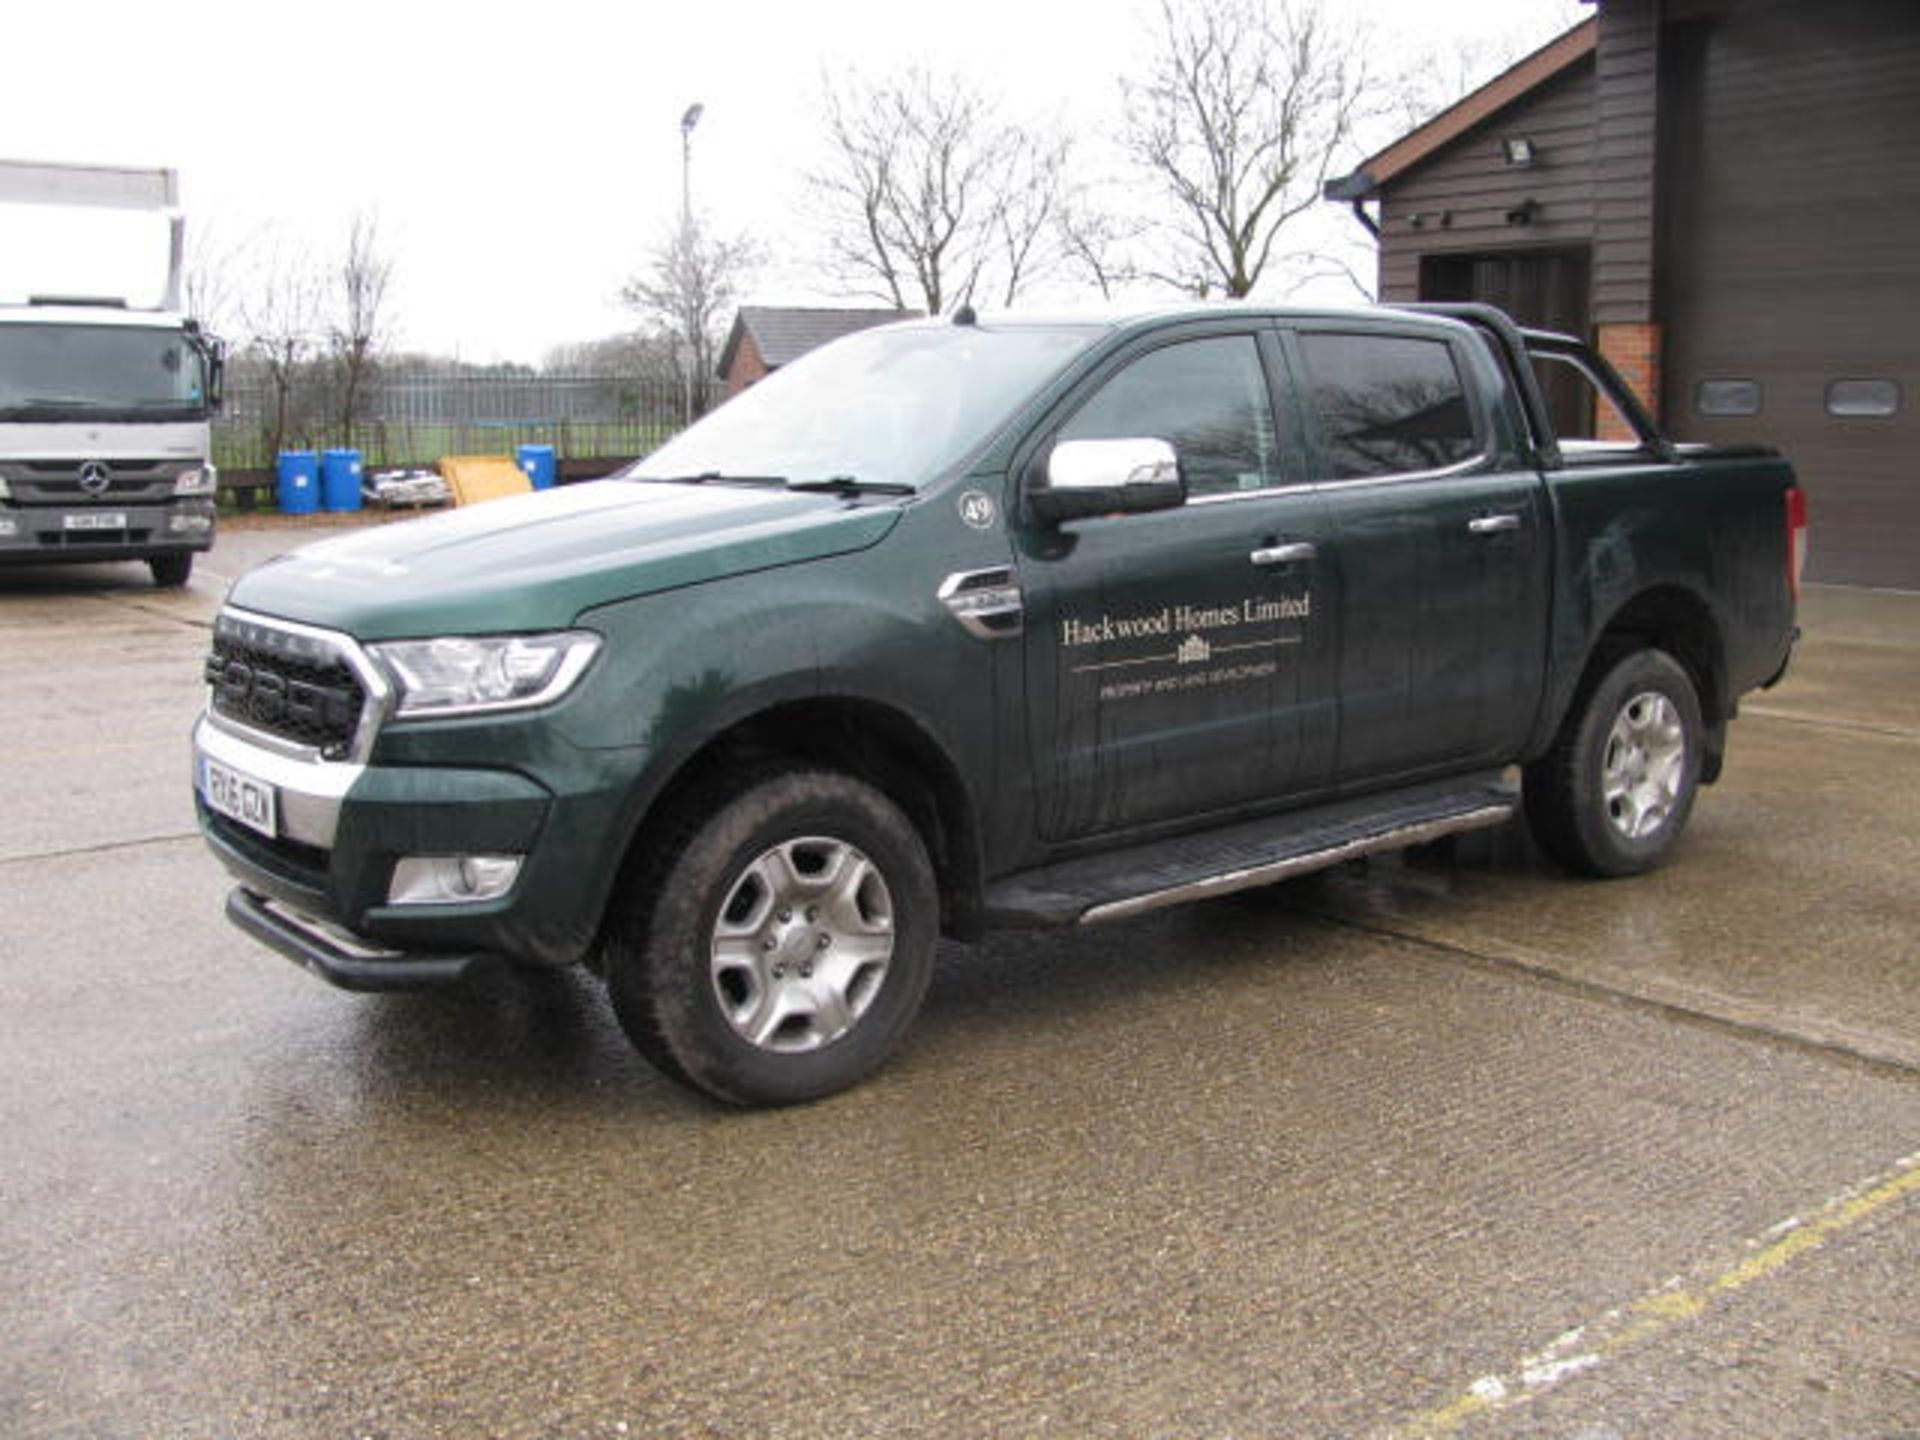 Ford Ranger Ltd 4x4 Double Cab 2.2D Pick Up, Registration No. RX16 GZW - Image 8 of 17